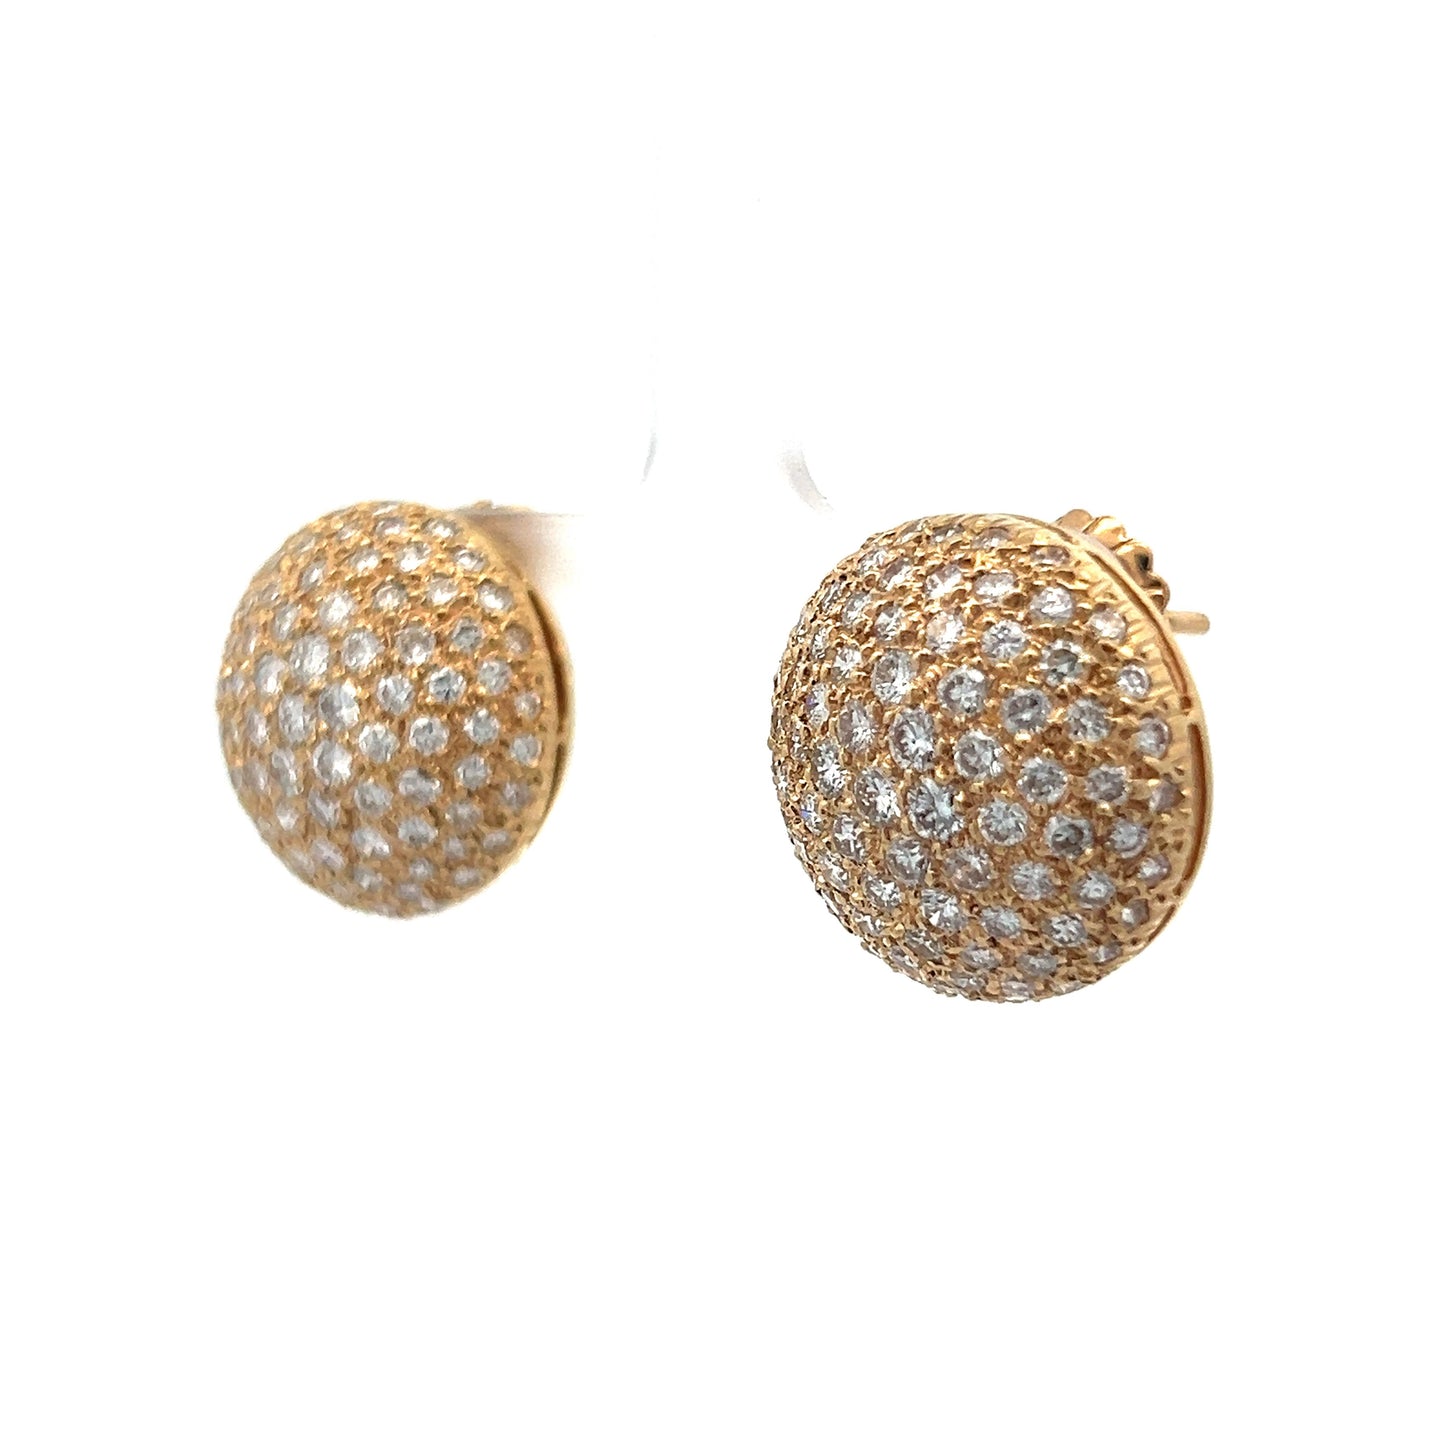 3.15 Pave Diamond Stud Earrings in Yellow Gold